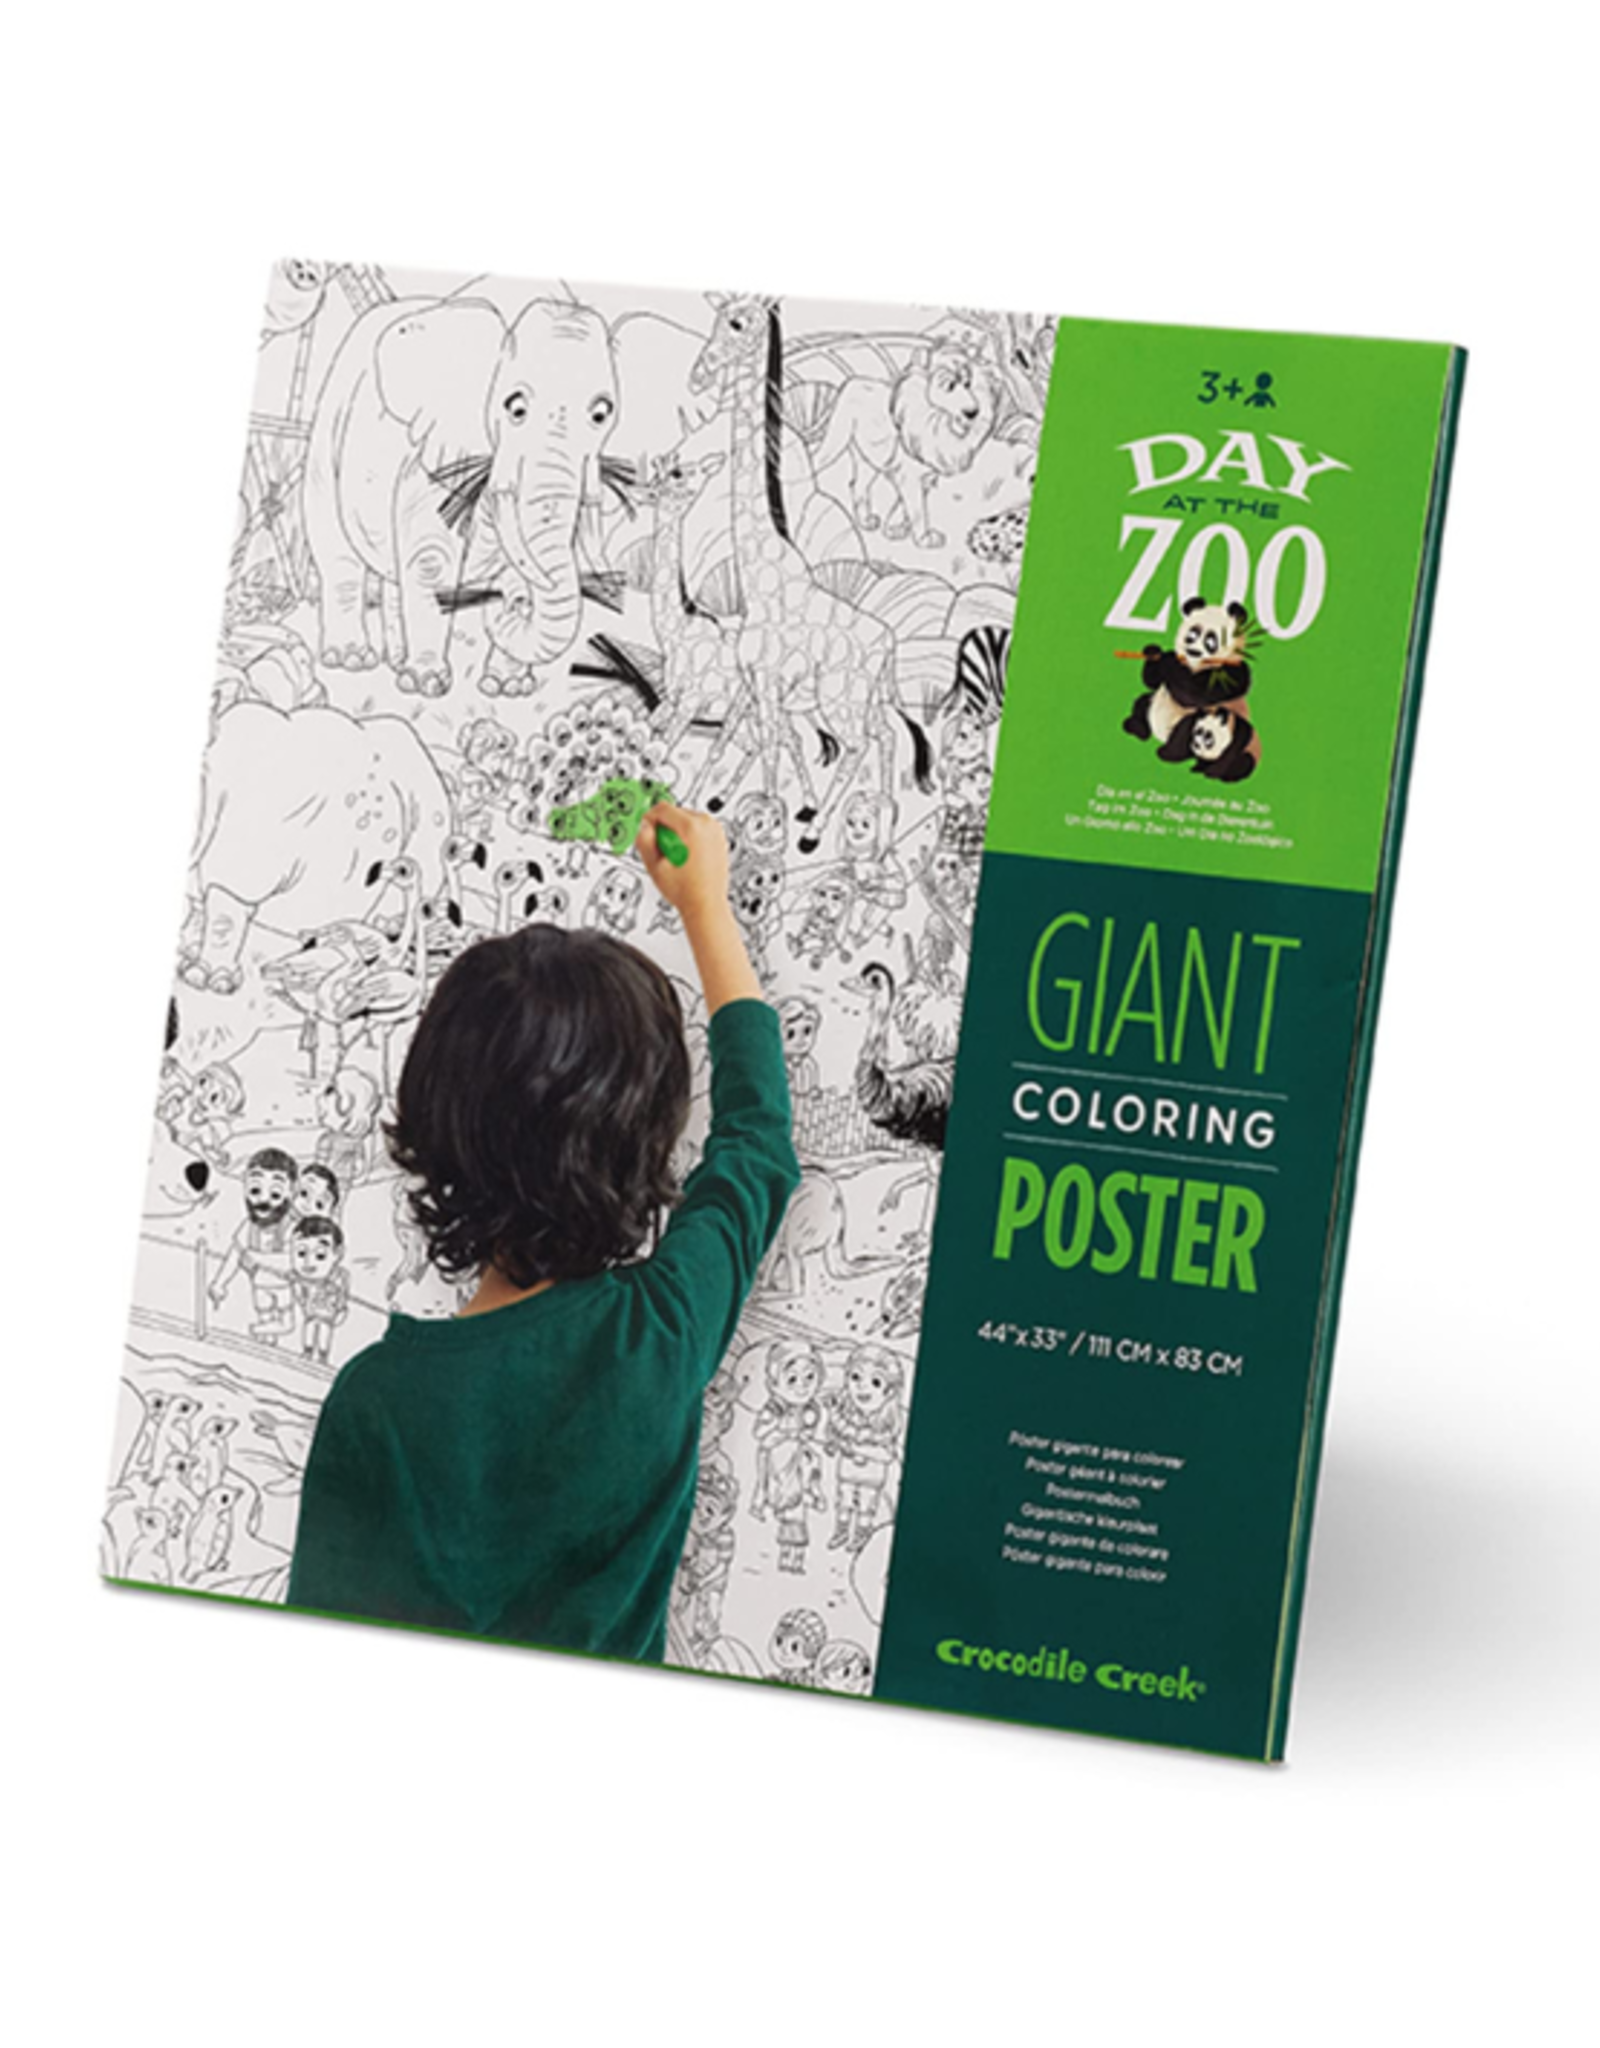 Crocodile Creek - Day at the Zoo Giant Coloring Poster